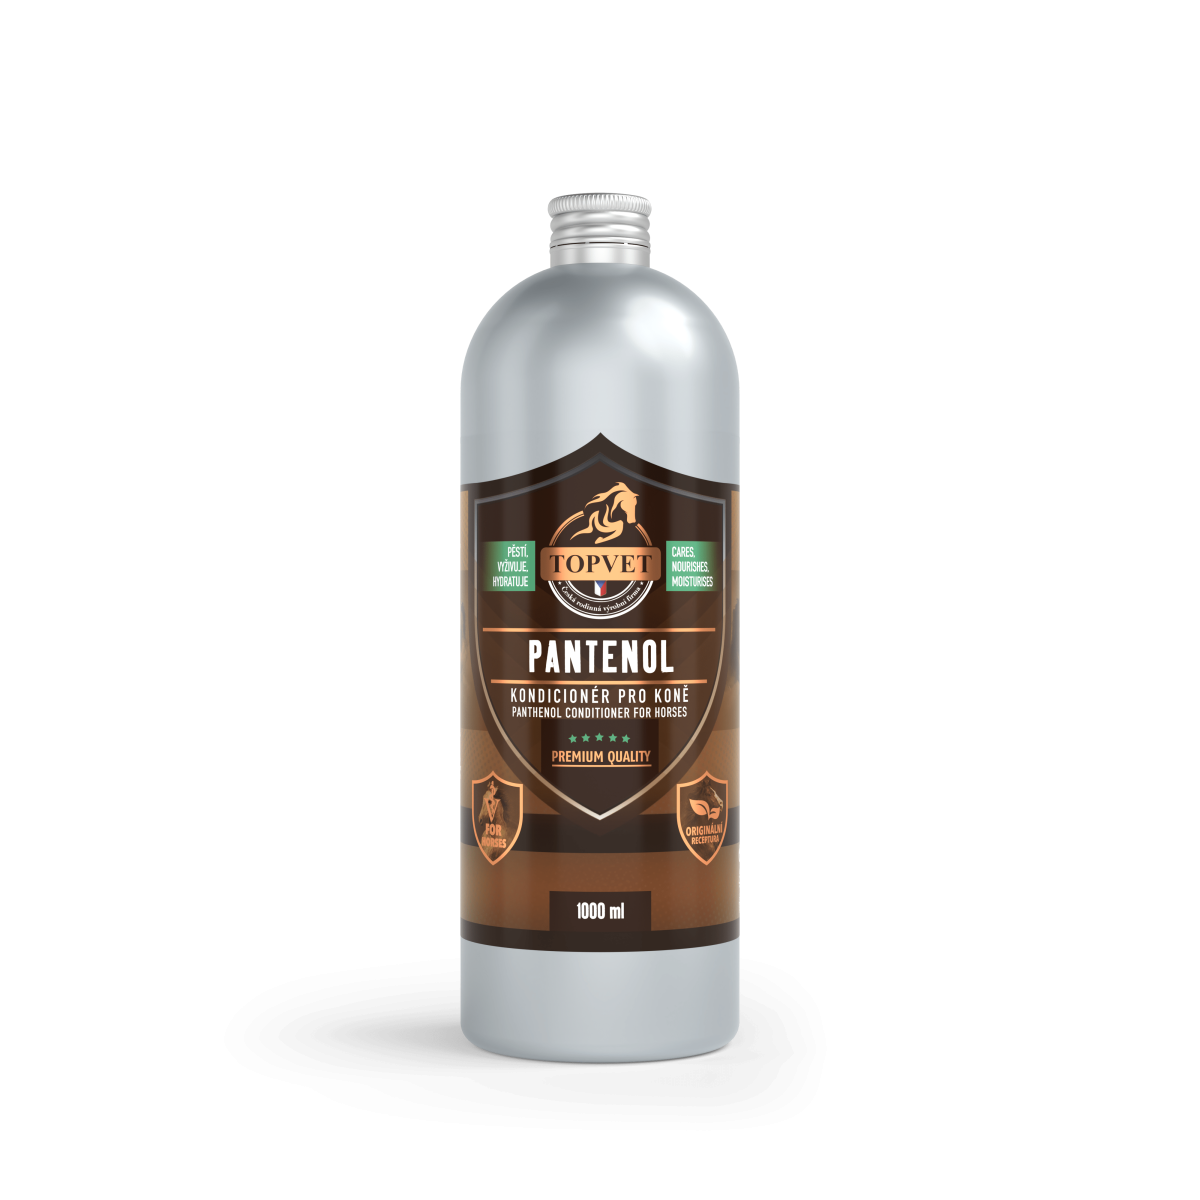 Panthenol conditioner for horses